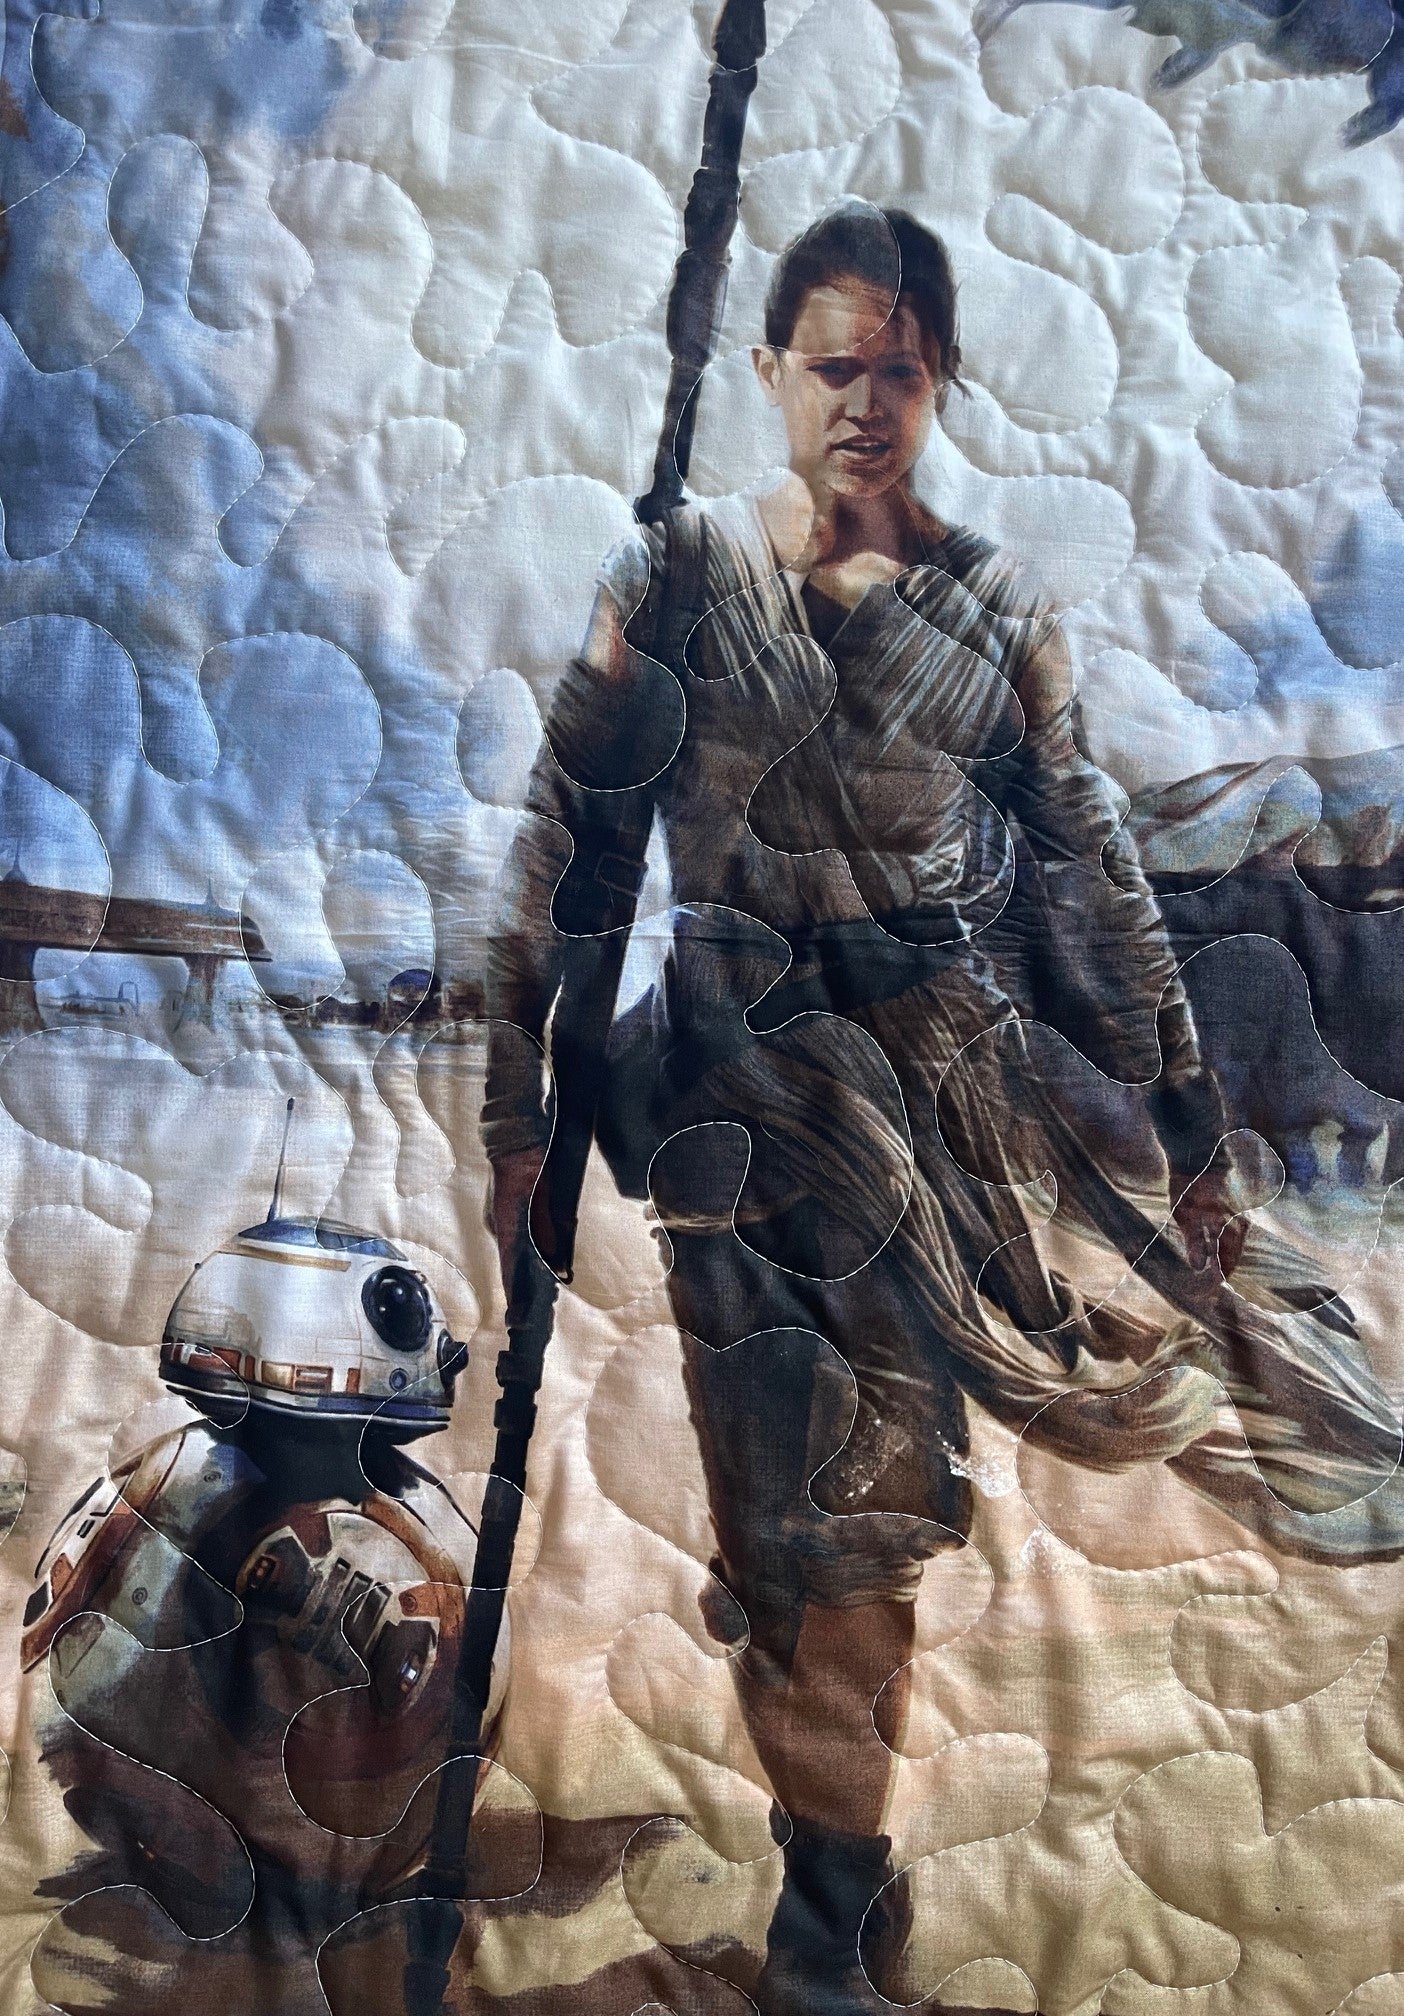 Star Wars Rogue One Rey & BB-8 Heroes inspired Quilted Blanket